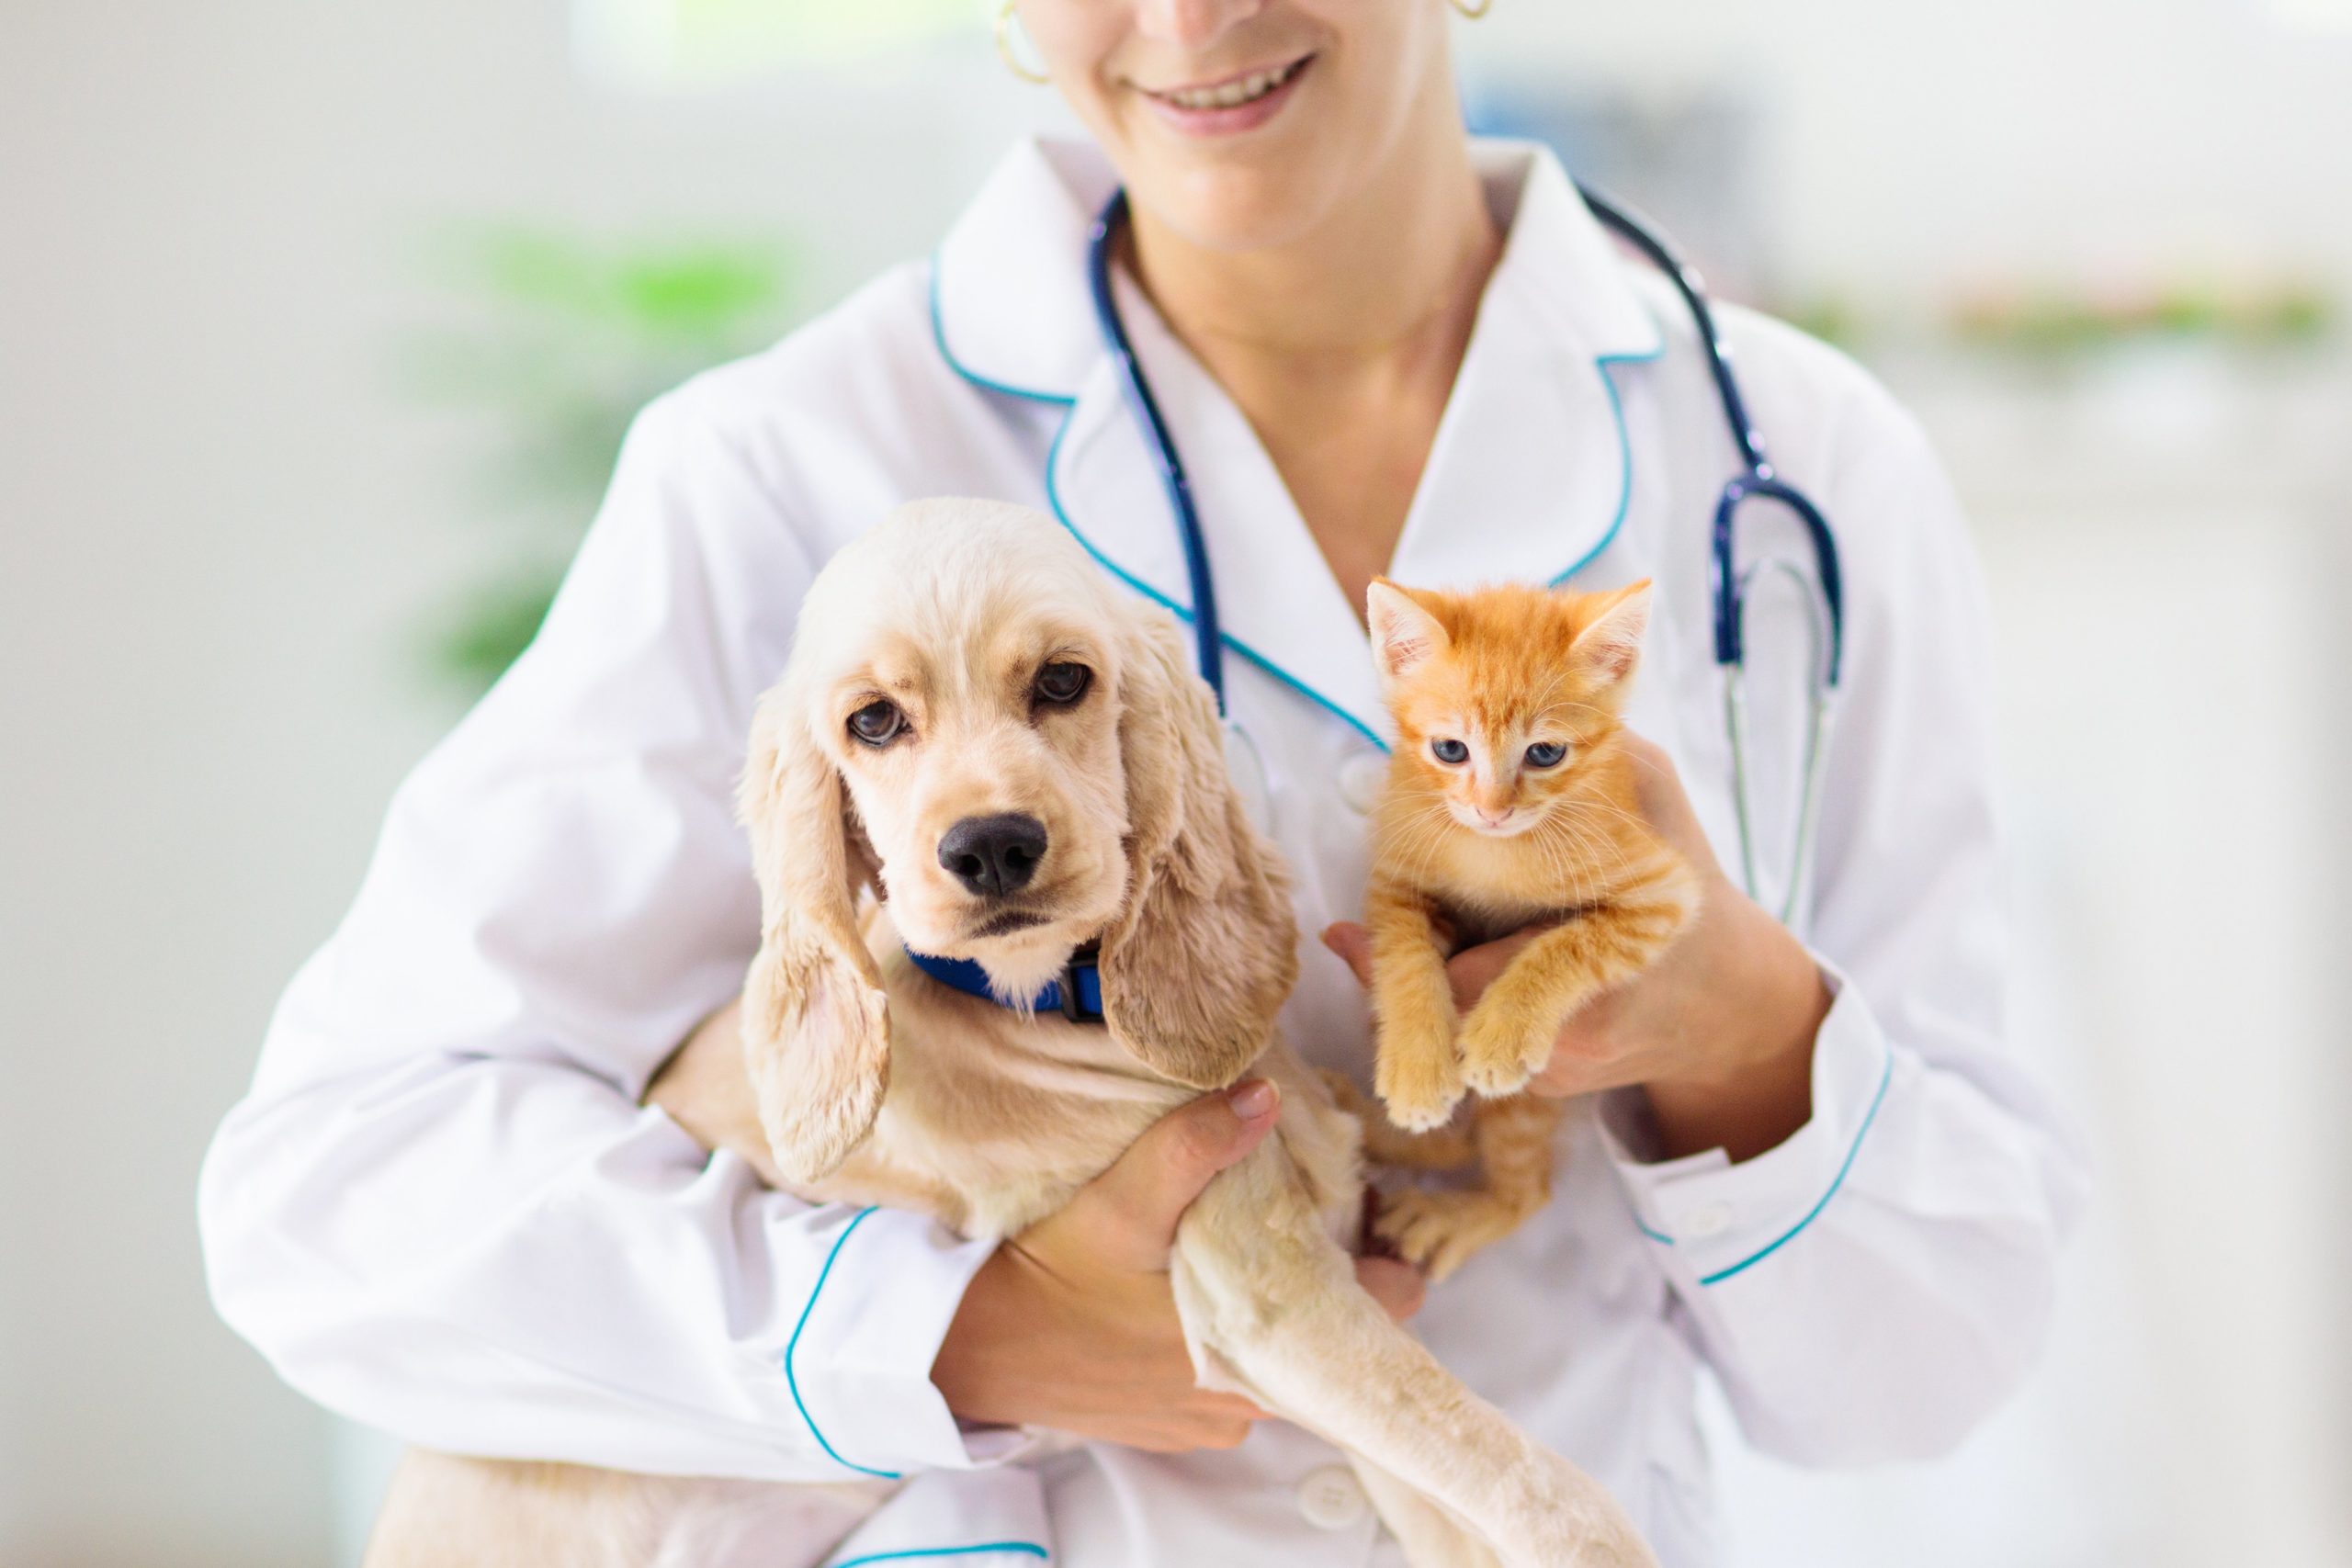 Cats, Dogs & Kittens: Advice For Animal Vaccinations